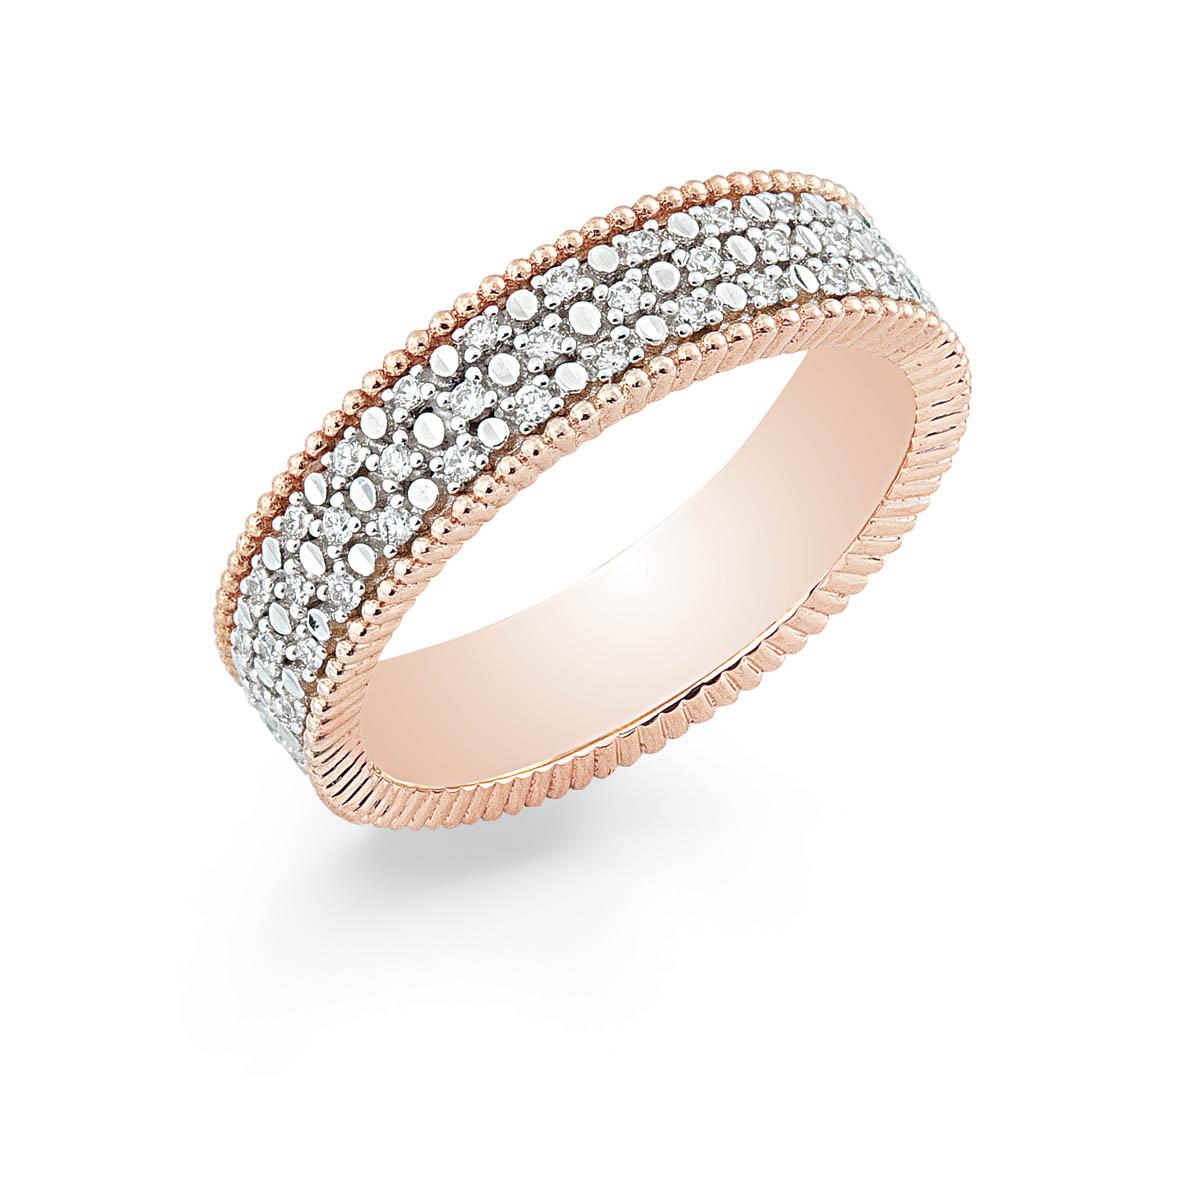 Eternity ring in 18kt gold and white diamonds - ADF204DB